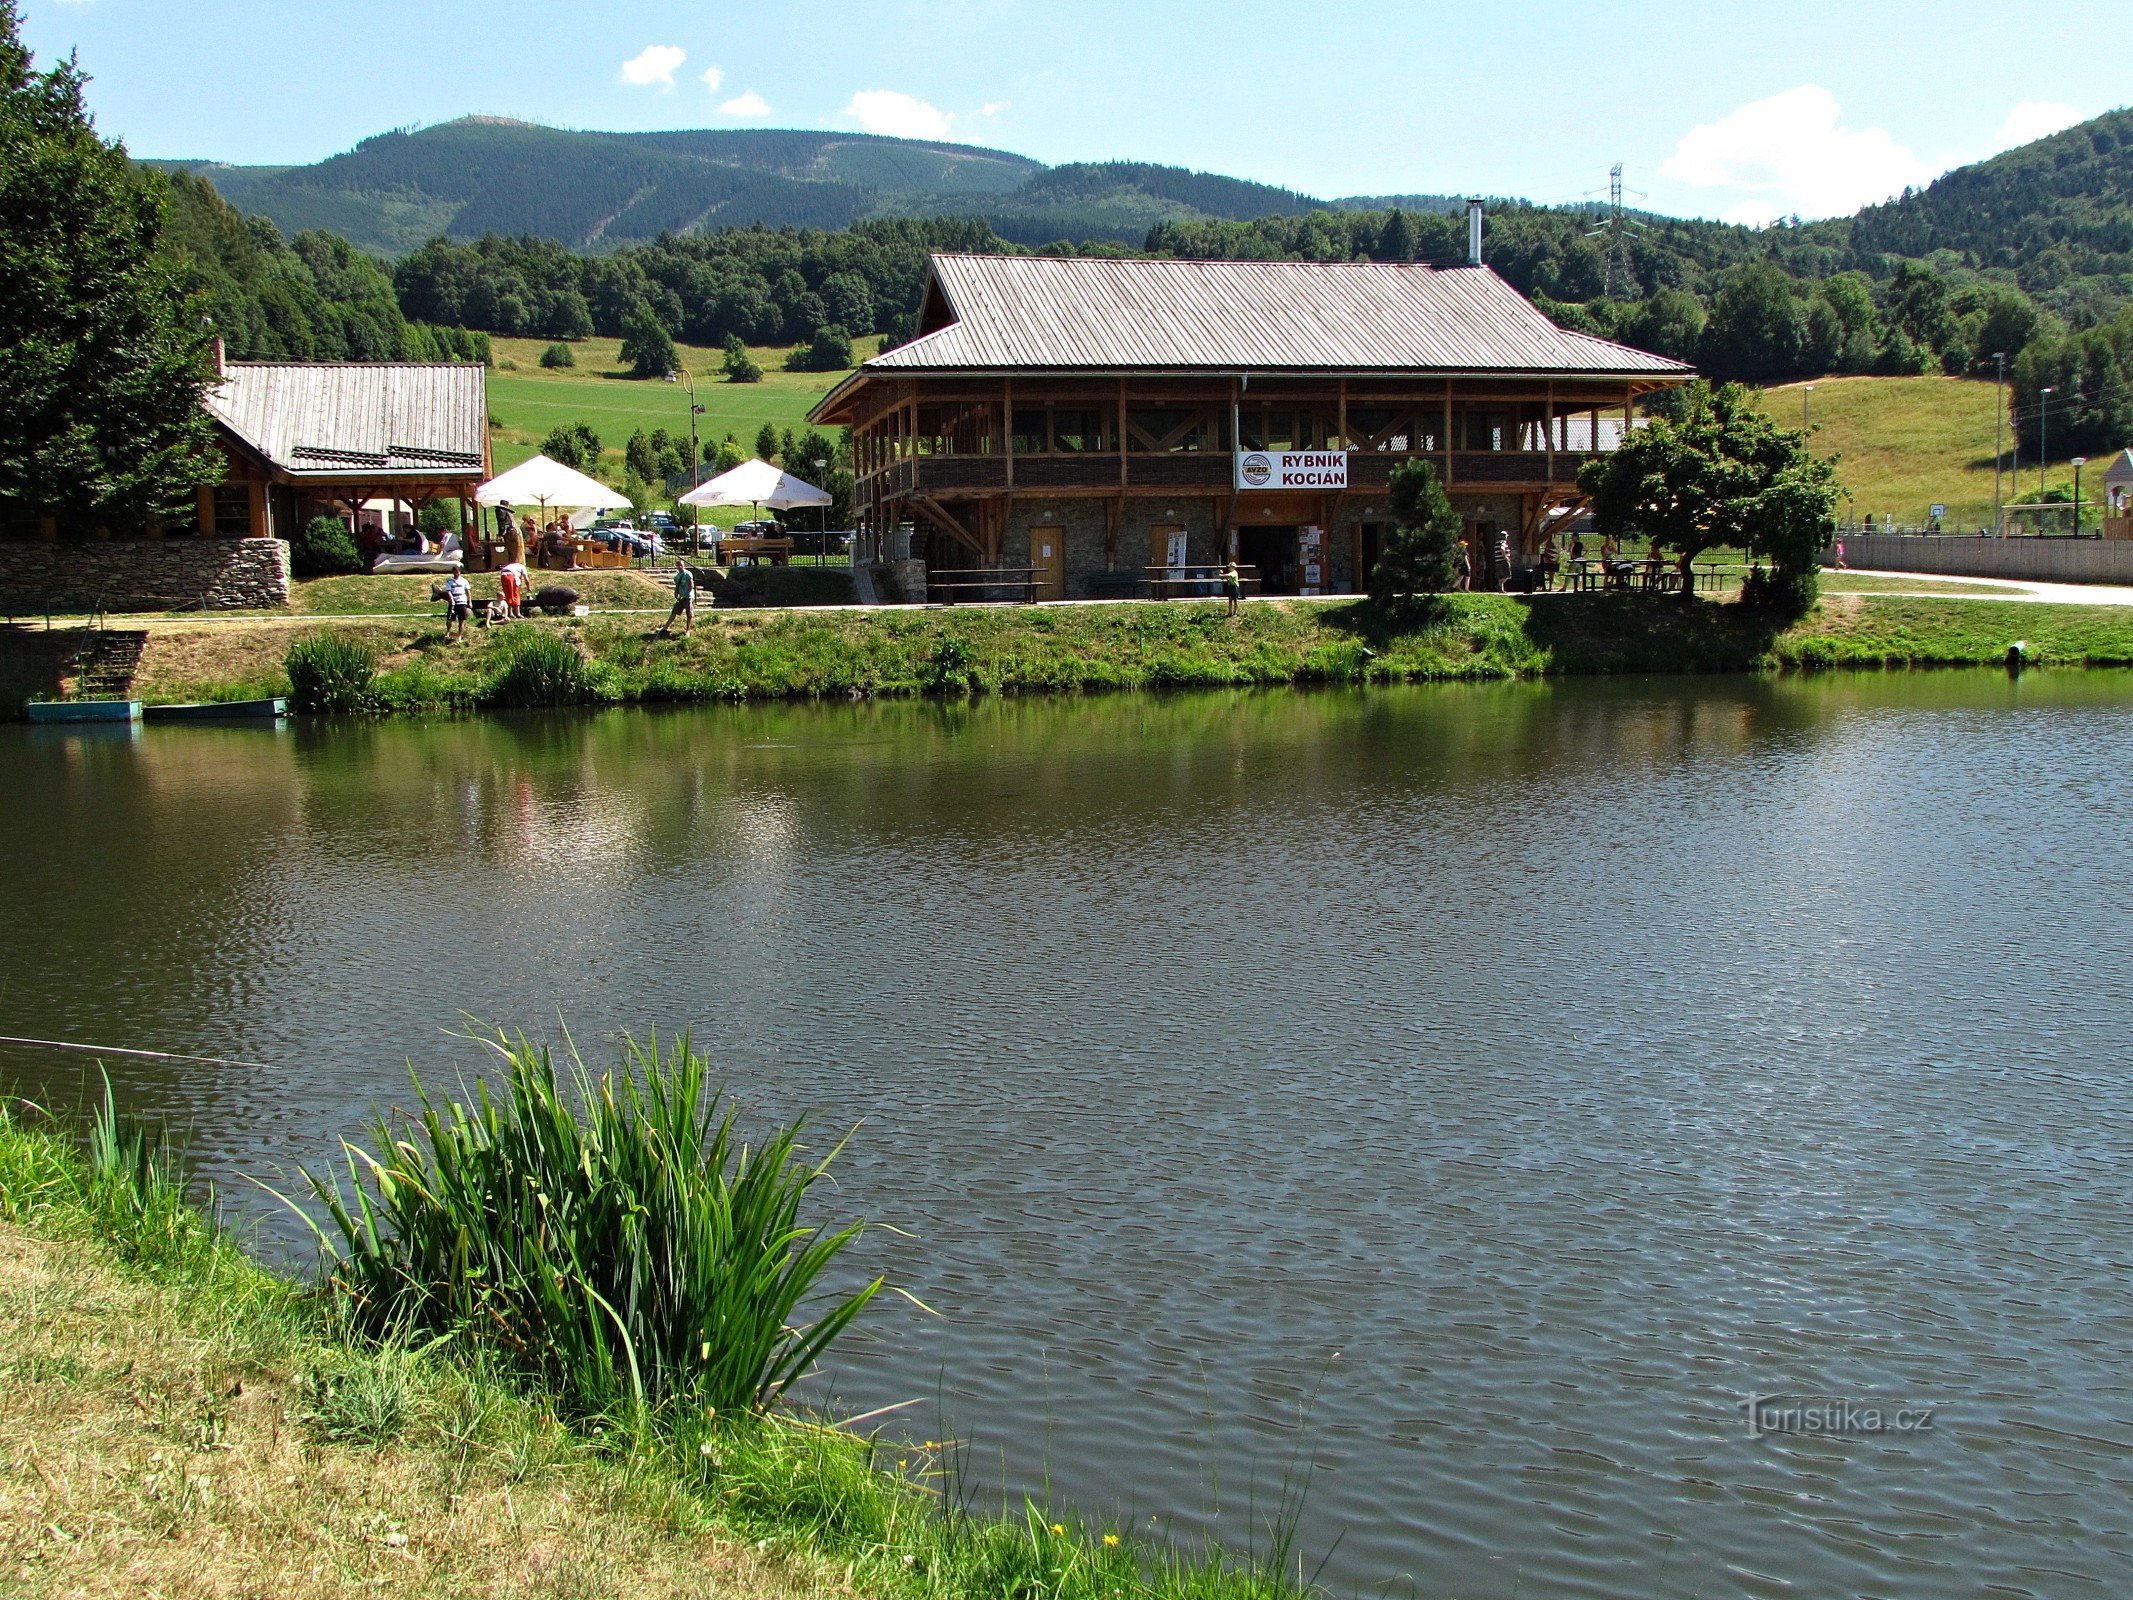 Pond and fishing bastion with restaurant